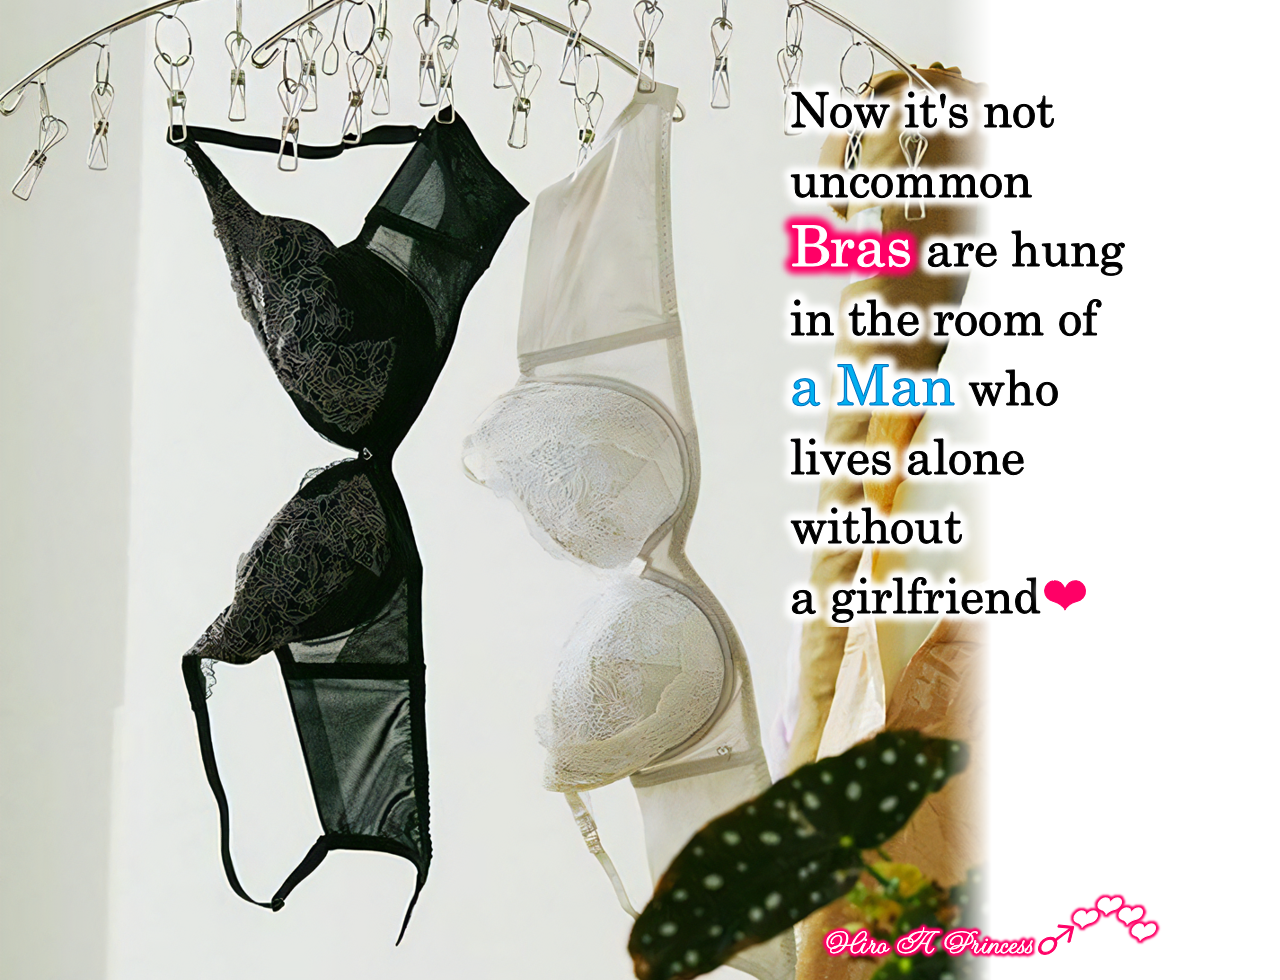 Bras are hung in the room of a Man who lives alone without a girlfriend E